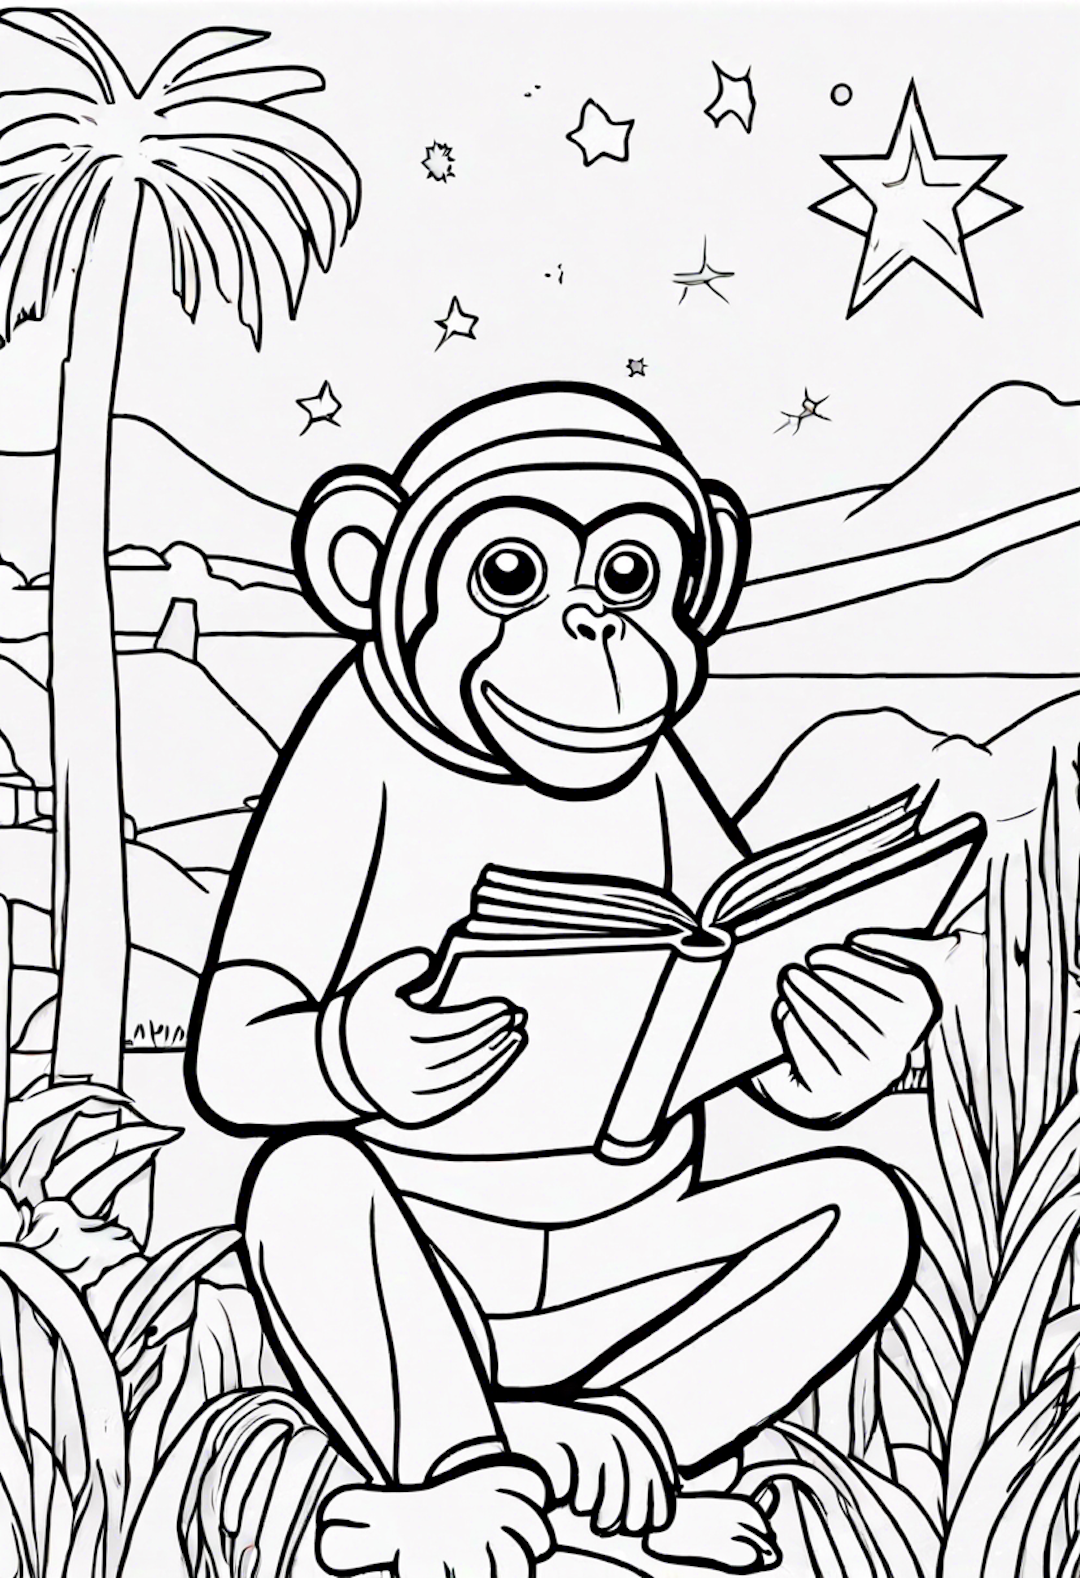 A Curious Star Reading A Book With A Chatty Monkey